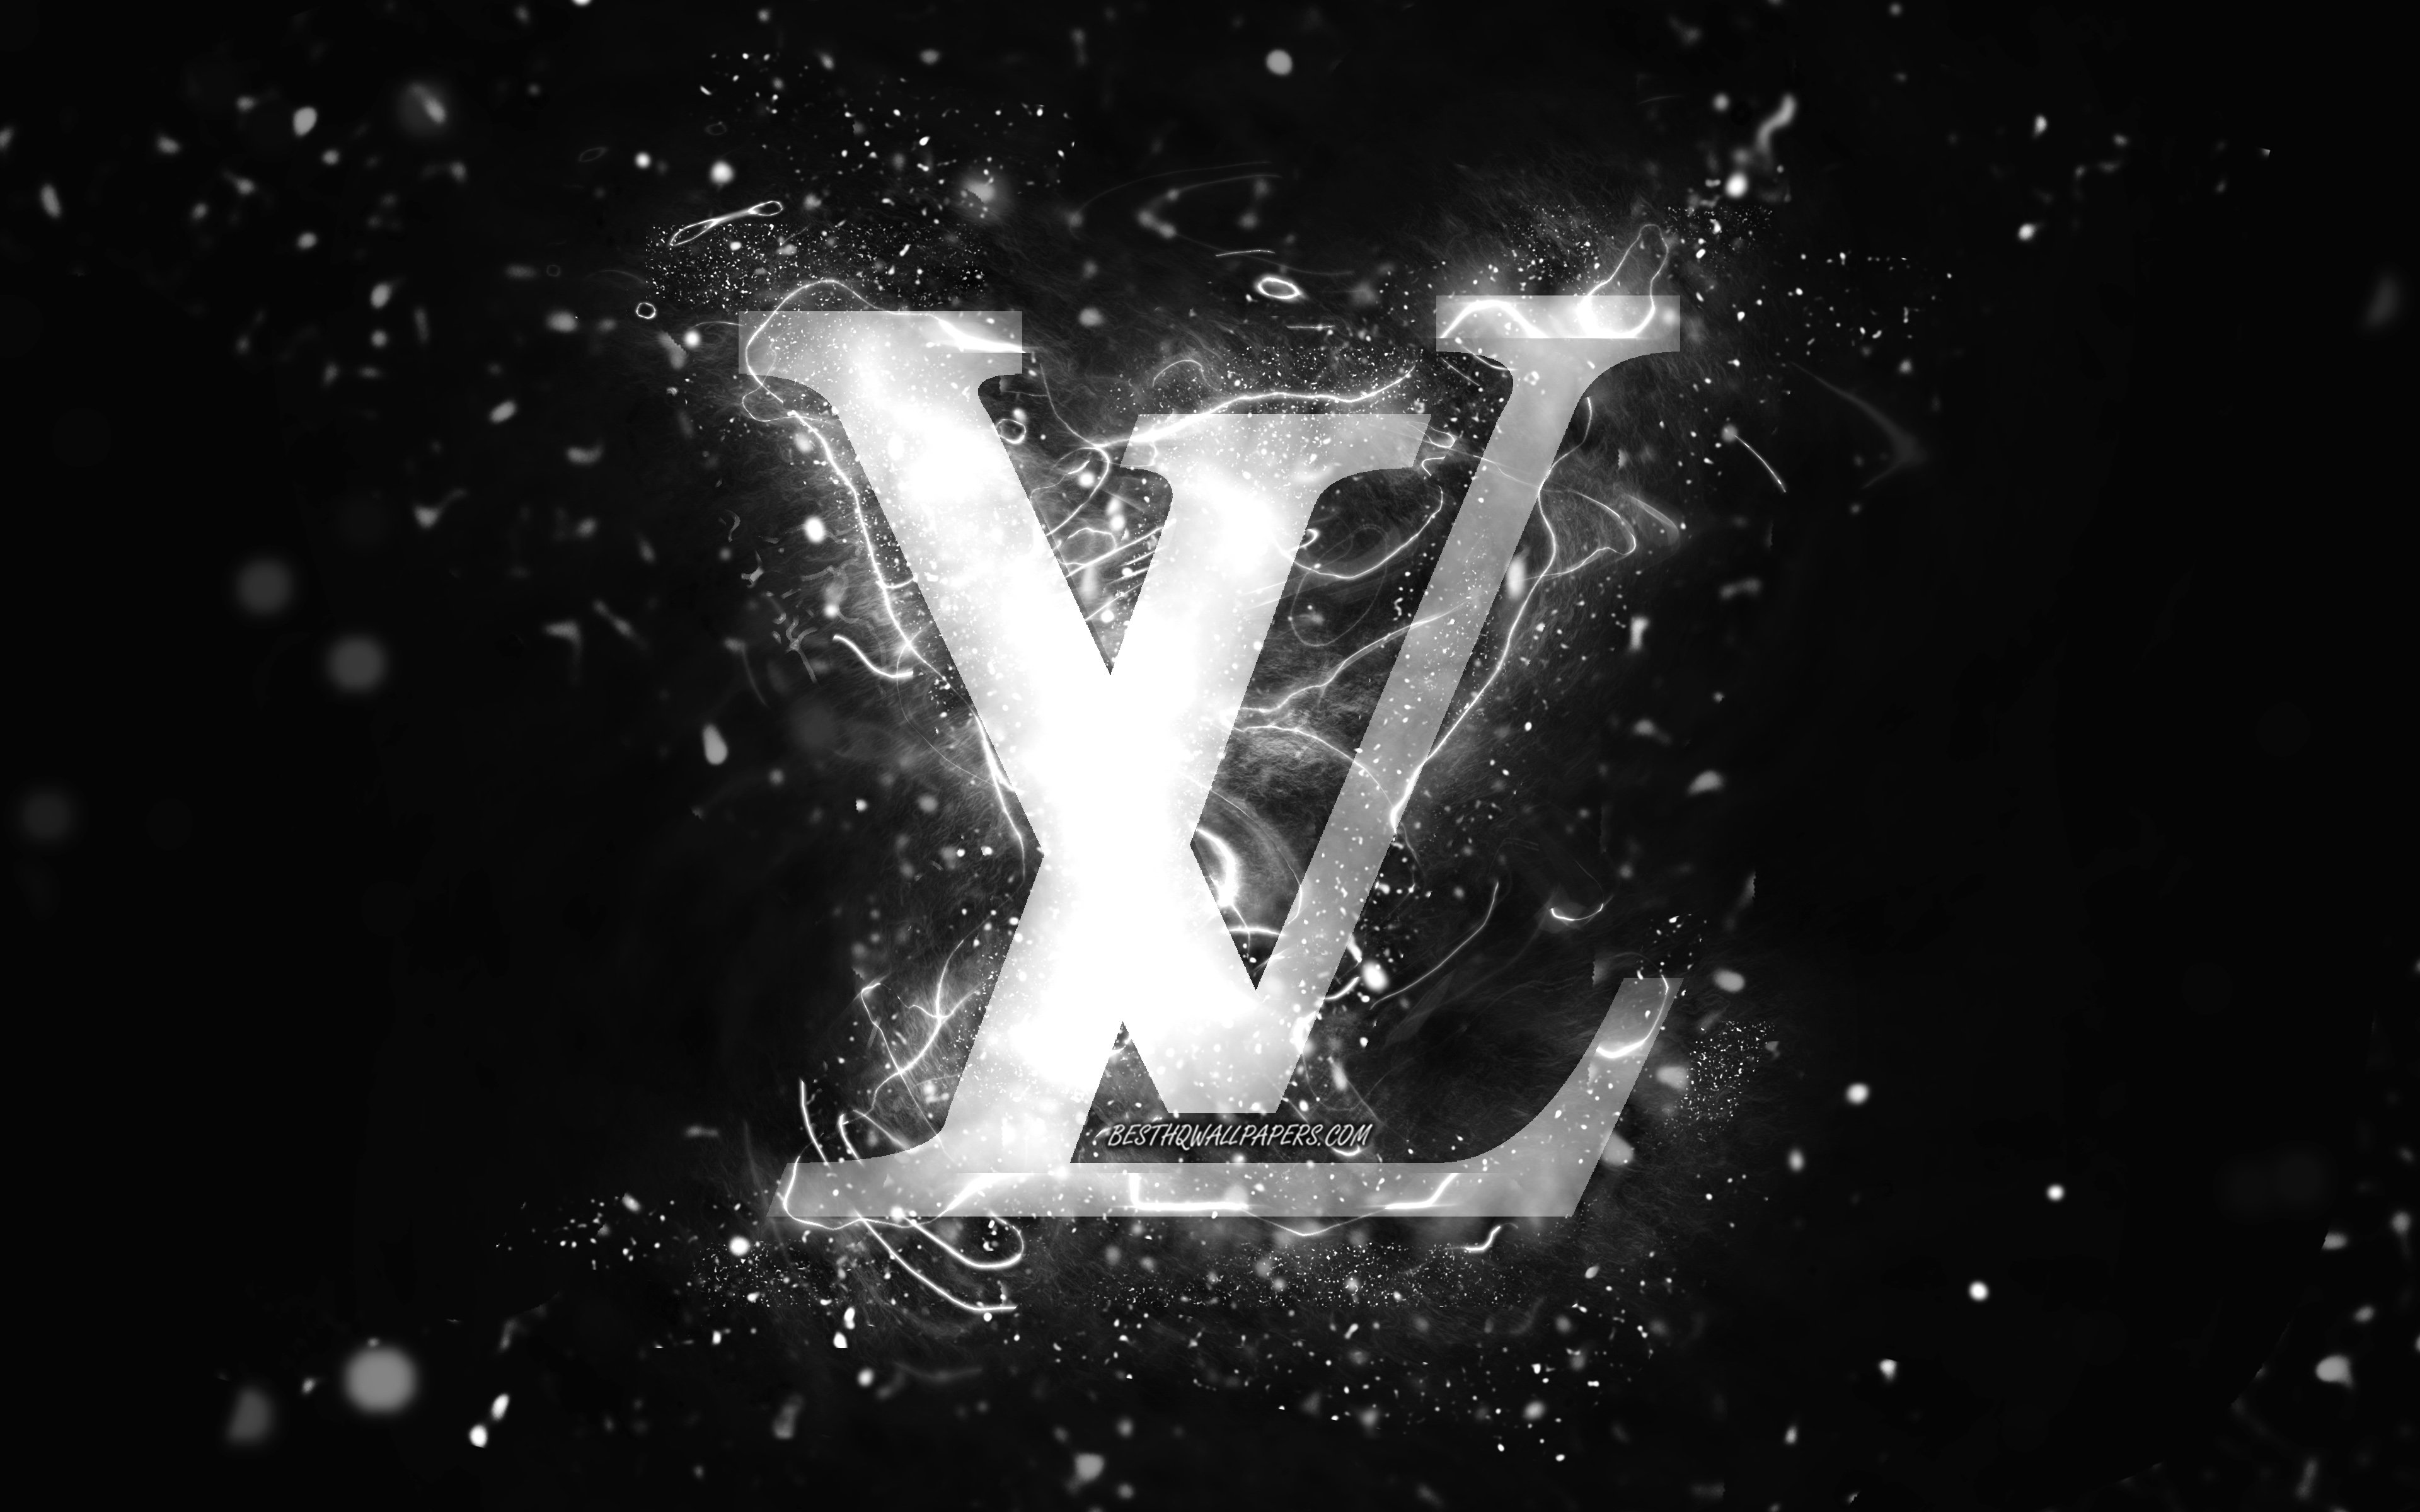 Download wallpapers Louis Vuitton white logo, 4k, white neon lights,  creative, black abstract background, Louis Vuitton logo, fashion brands, Louis  Vuitton for desktop with resolution 3840x2400. High Quality HD pictures  wallpapers